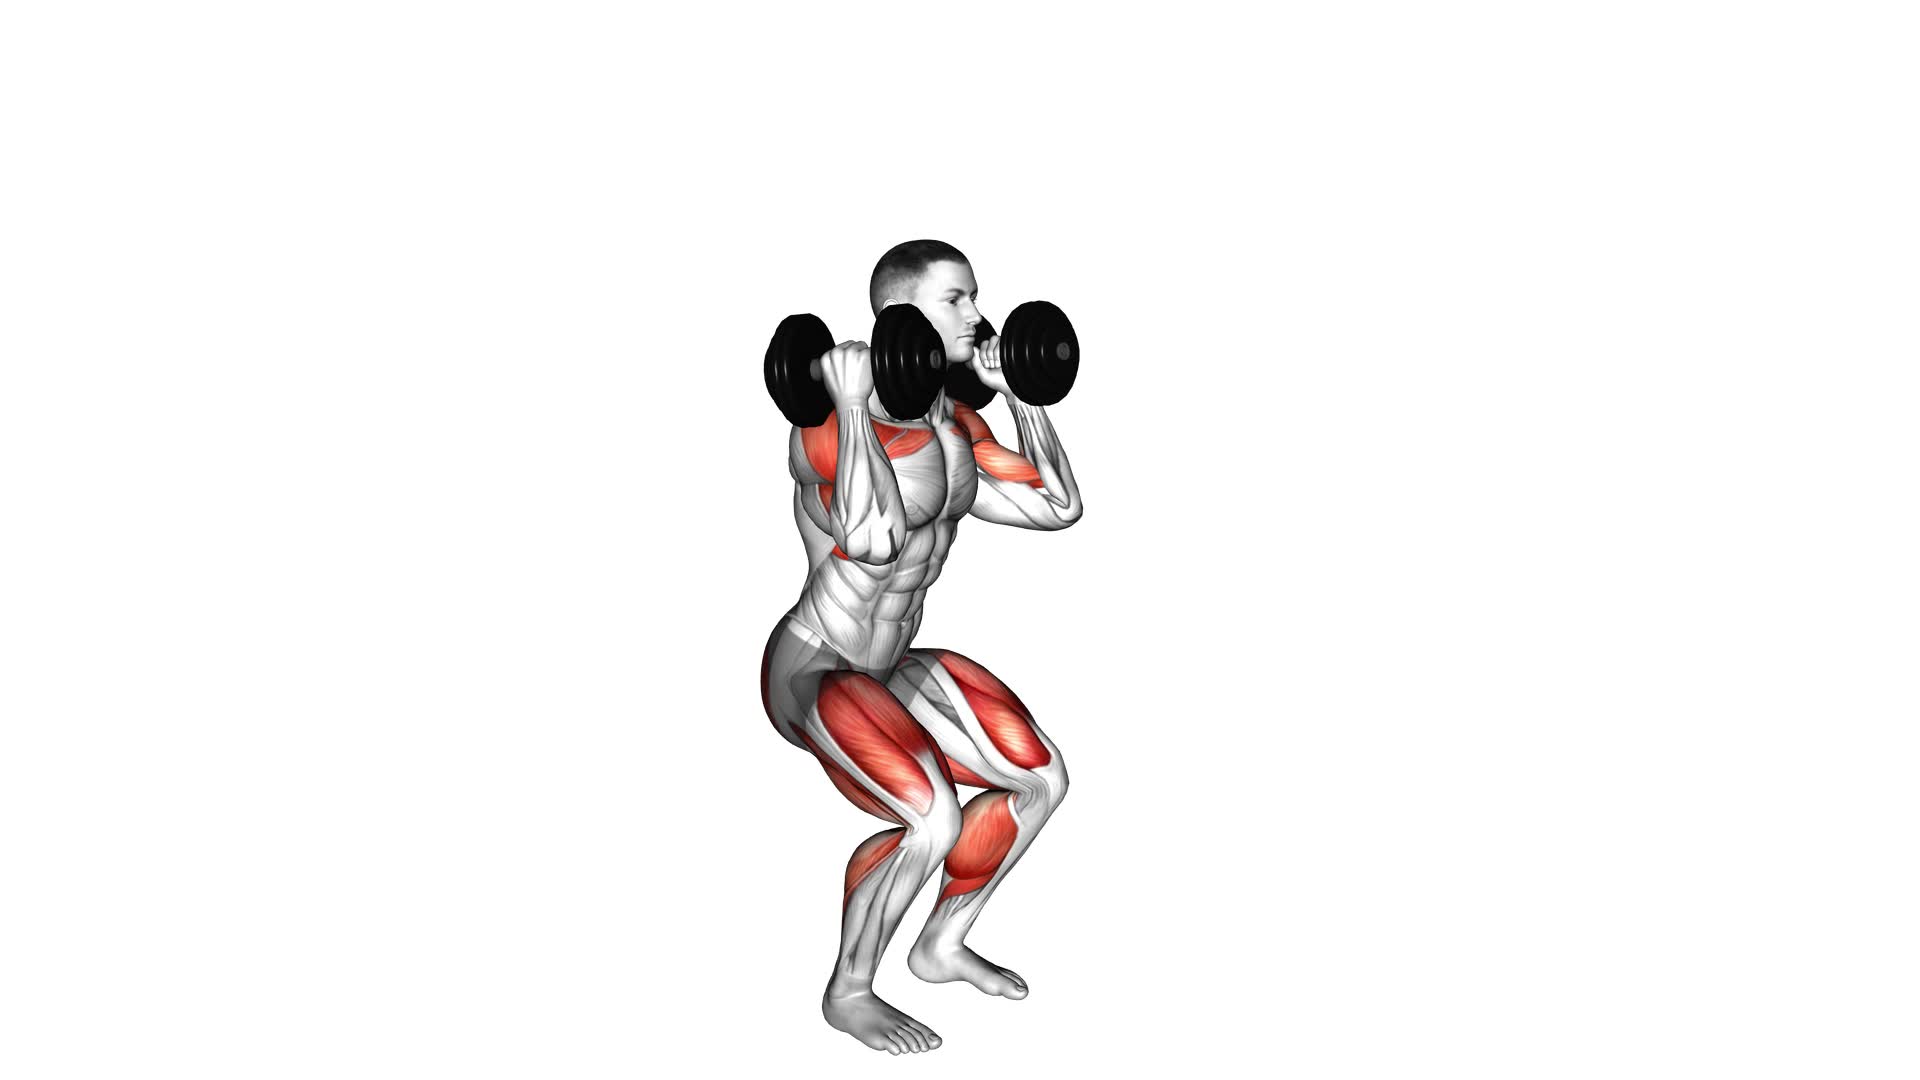 Dumbbell Clean - Video Exercise Guide & Tips